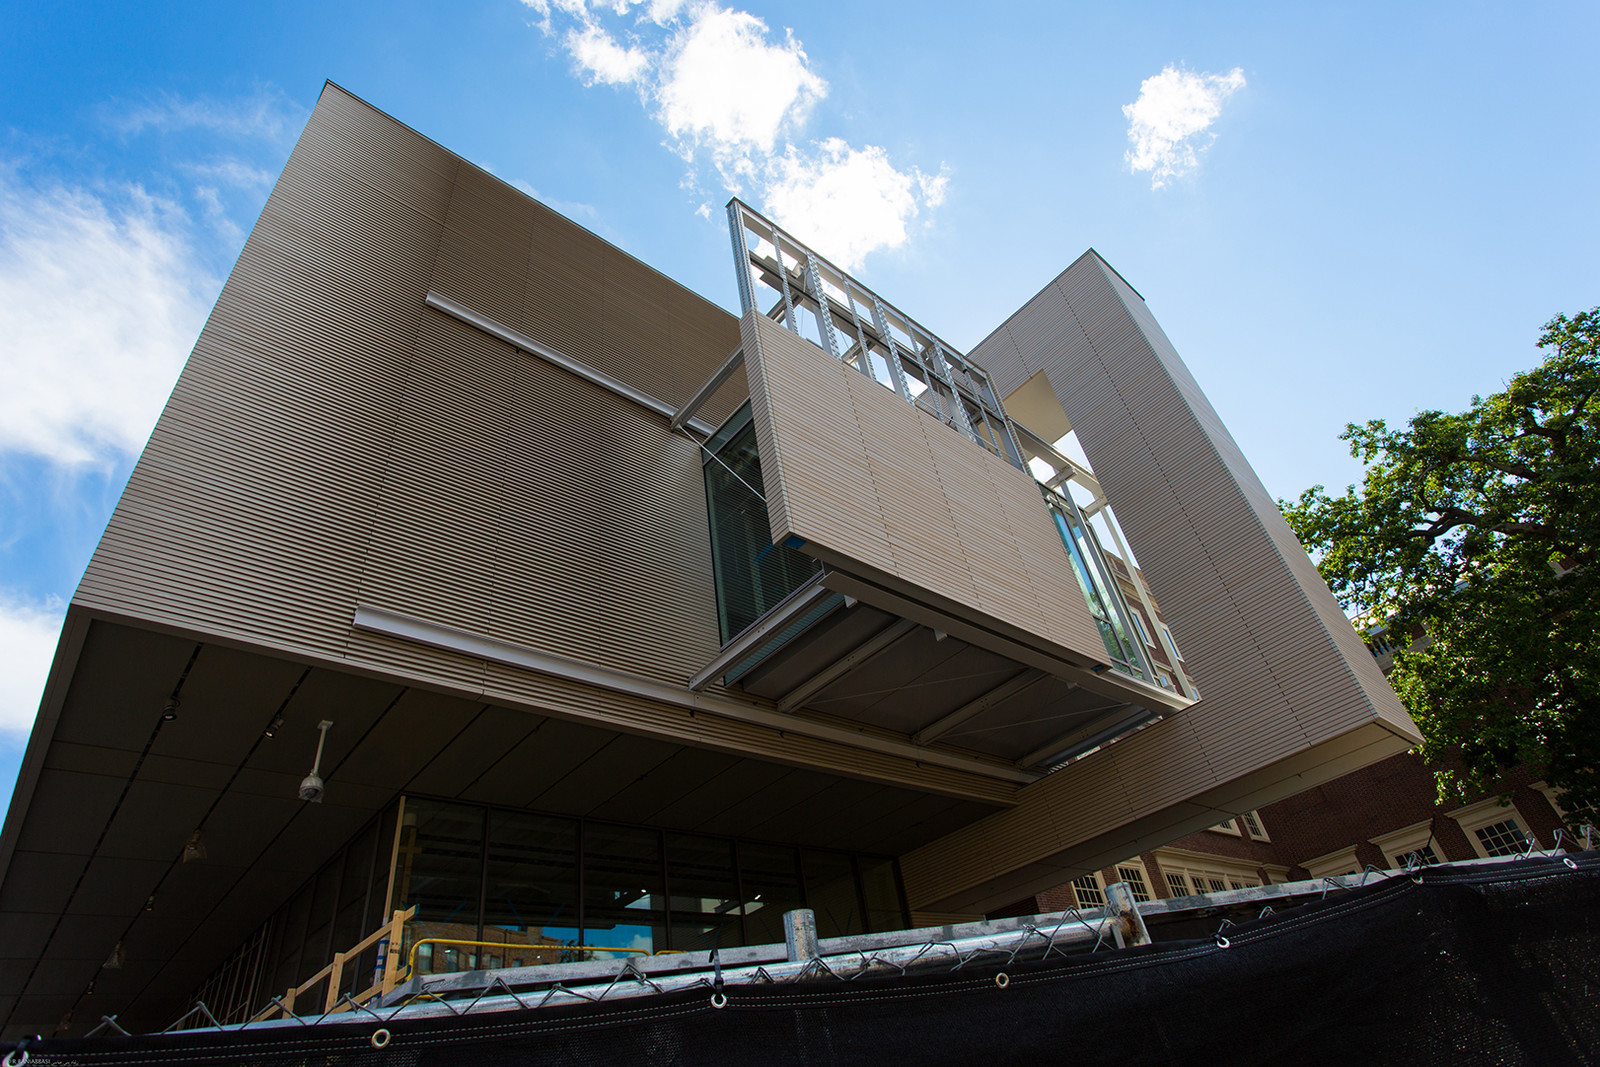 Moveable panels on the north and south sides of the addition can control the flow of natural light into the Harvard Art Museum. The wood exterior cladding adds a warmth to this very modern addition.